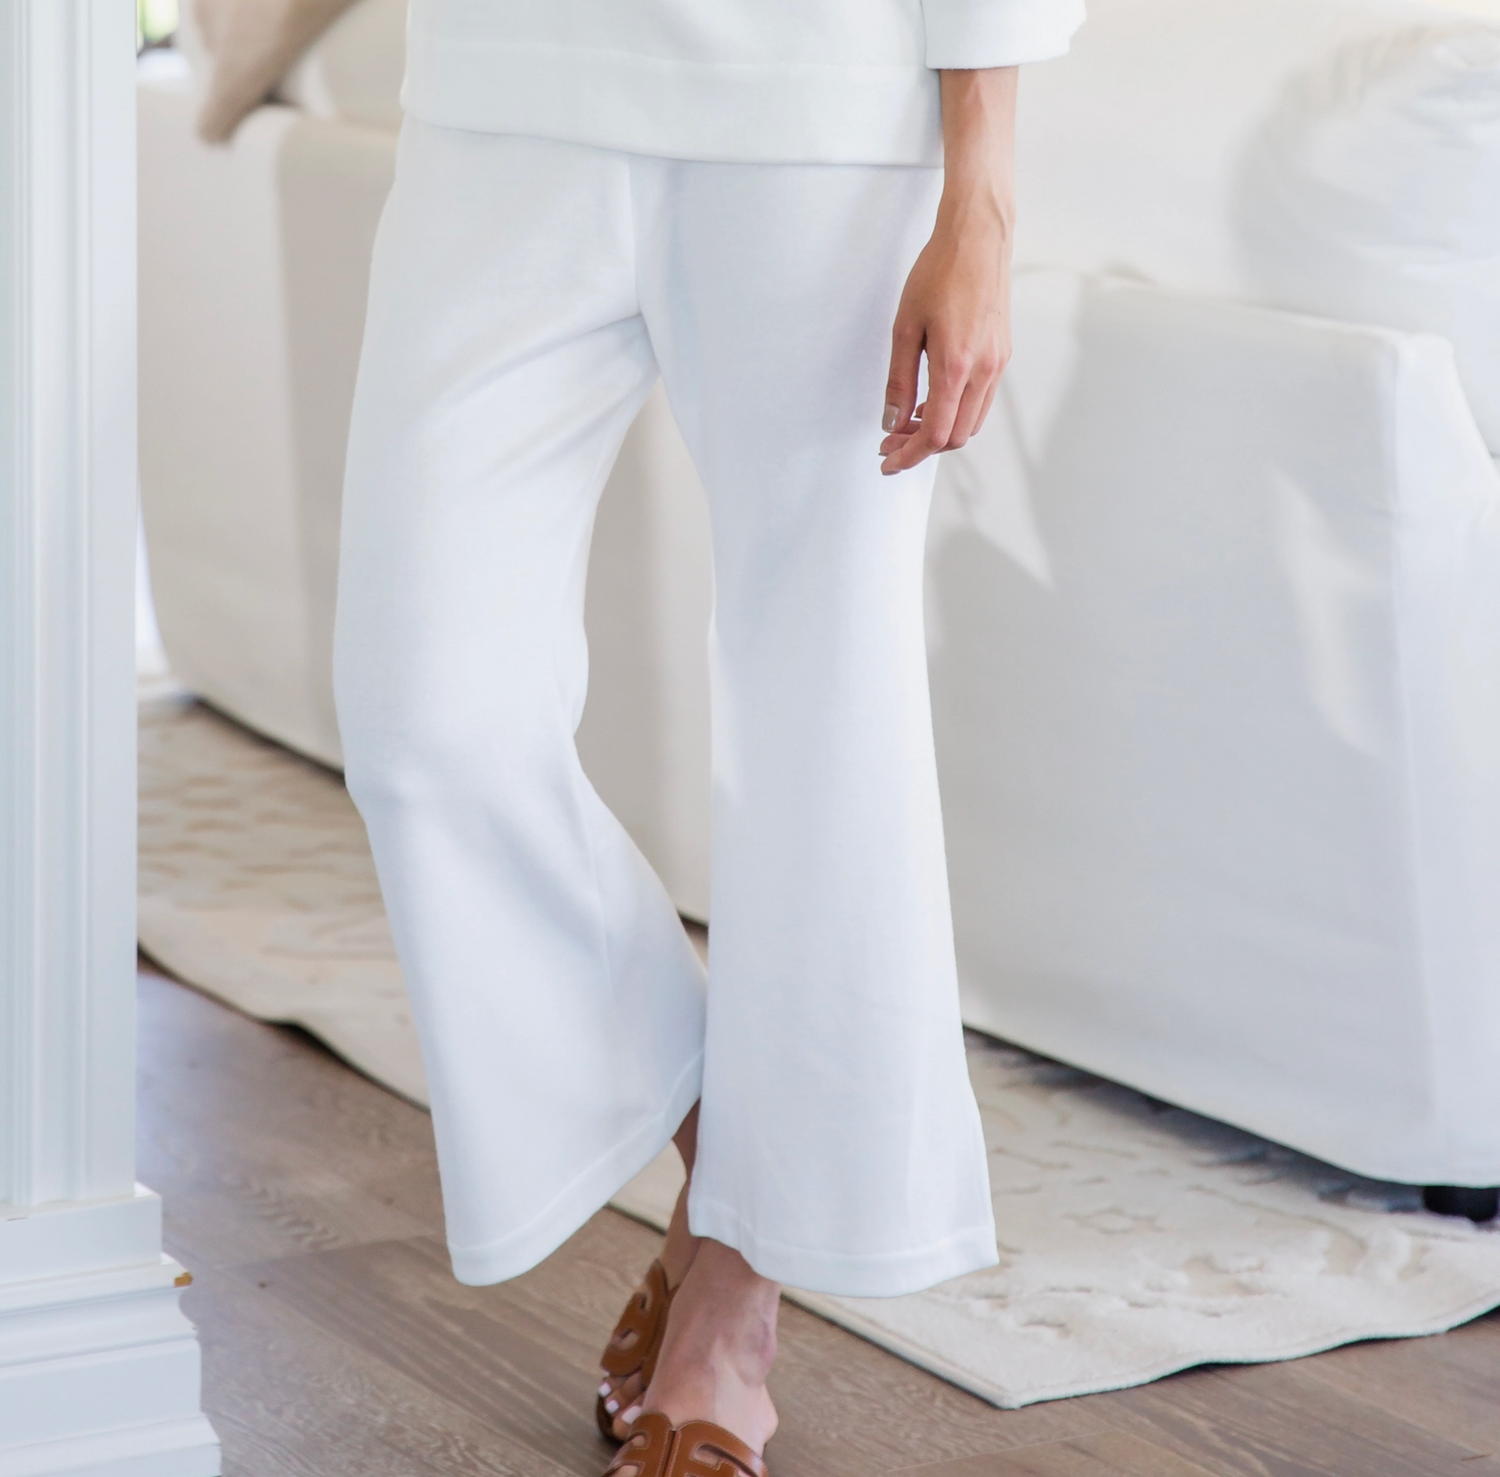 he Elegant and Comfy Corinna Pant is the perfect addition to your wardrobe. Featuring a fabric blend that is both soft and luxurious, this pant can be dressed up for a night out or down for an easy, comfortable look when traveling or leisurely lounging. Ultra-stylish and elevated, tailored from high-end materials, the Corinna Pant is an essential piece of luxury.